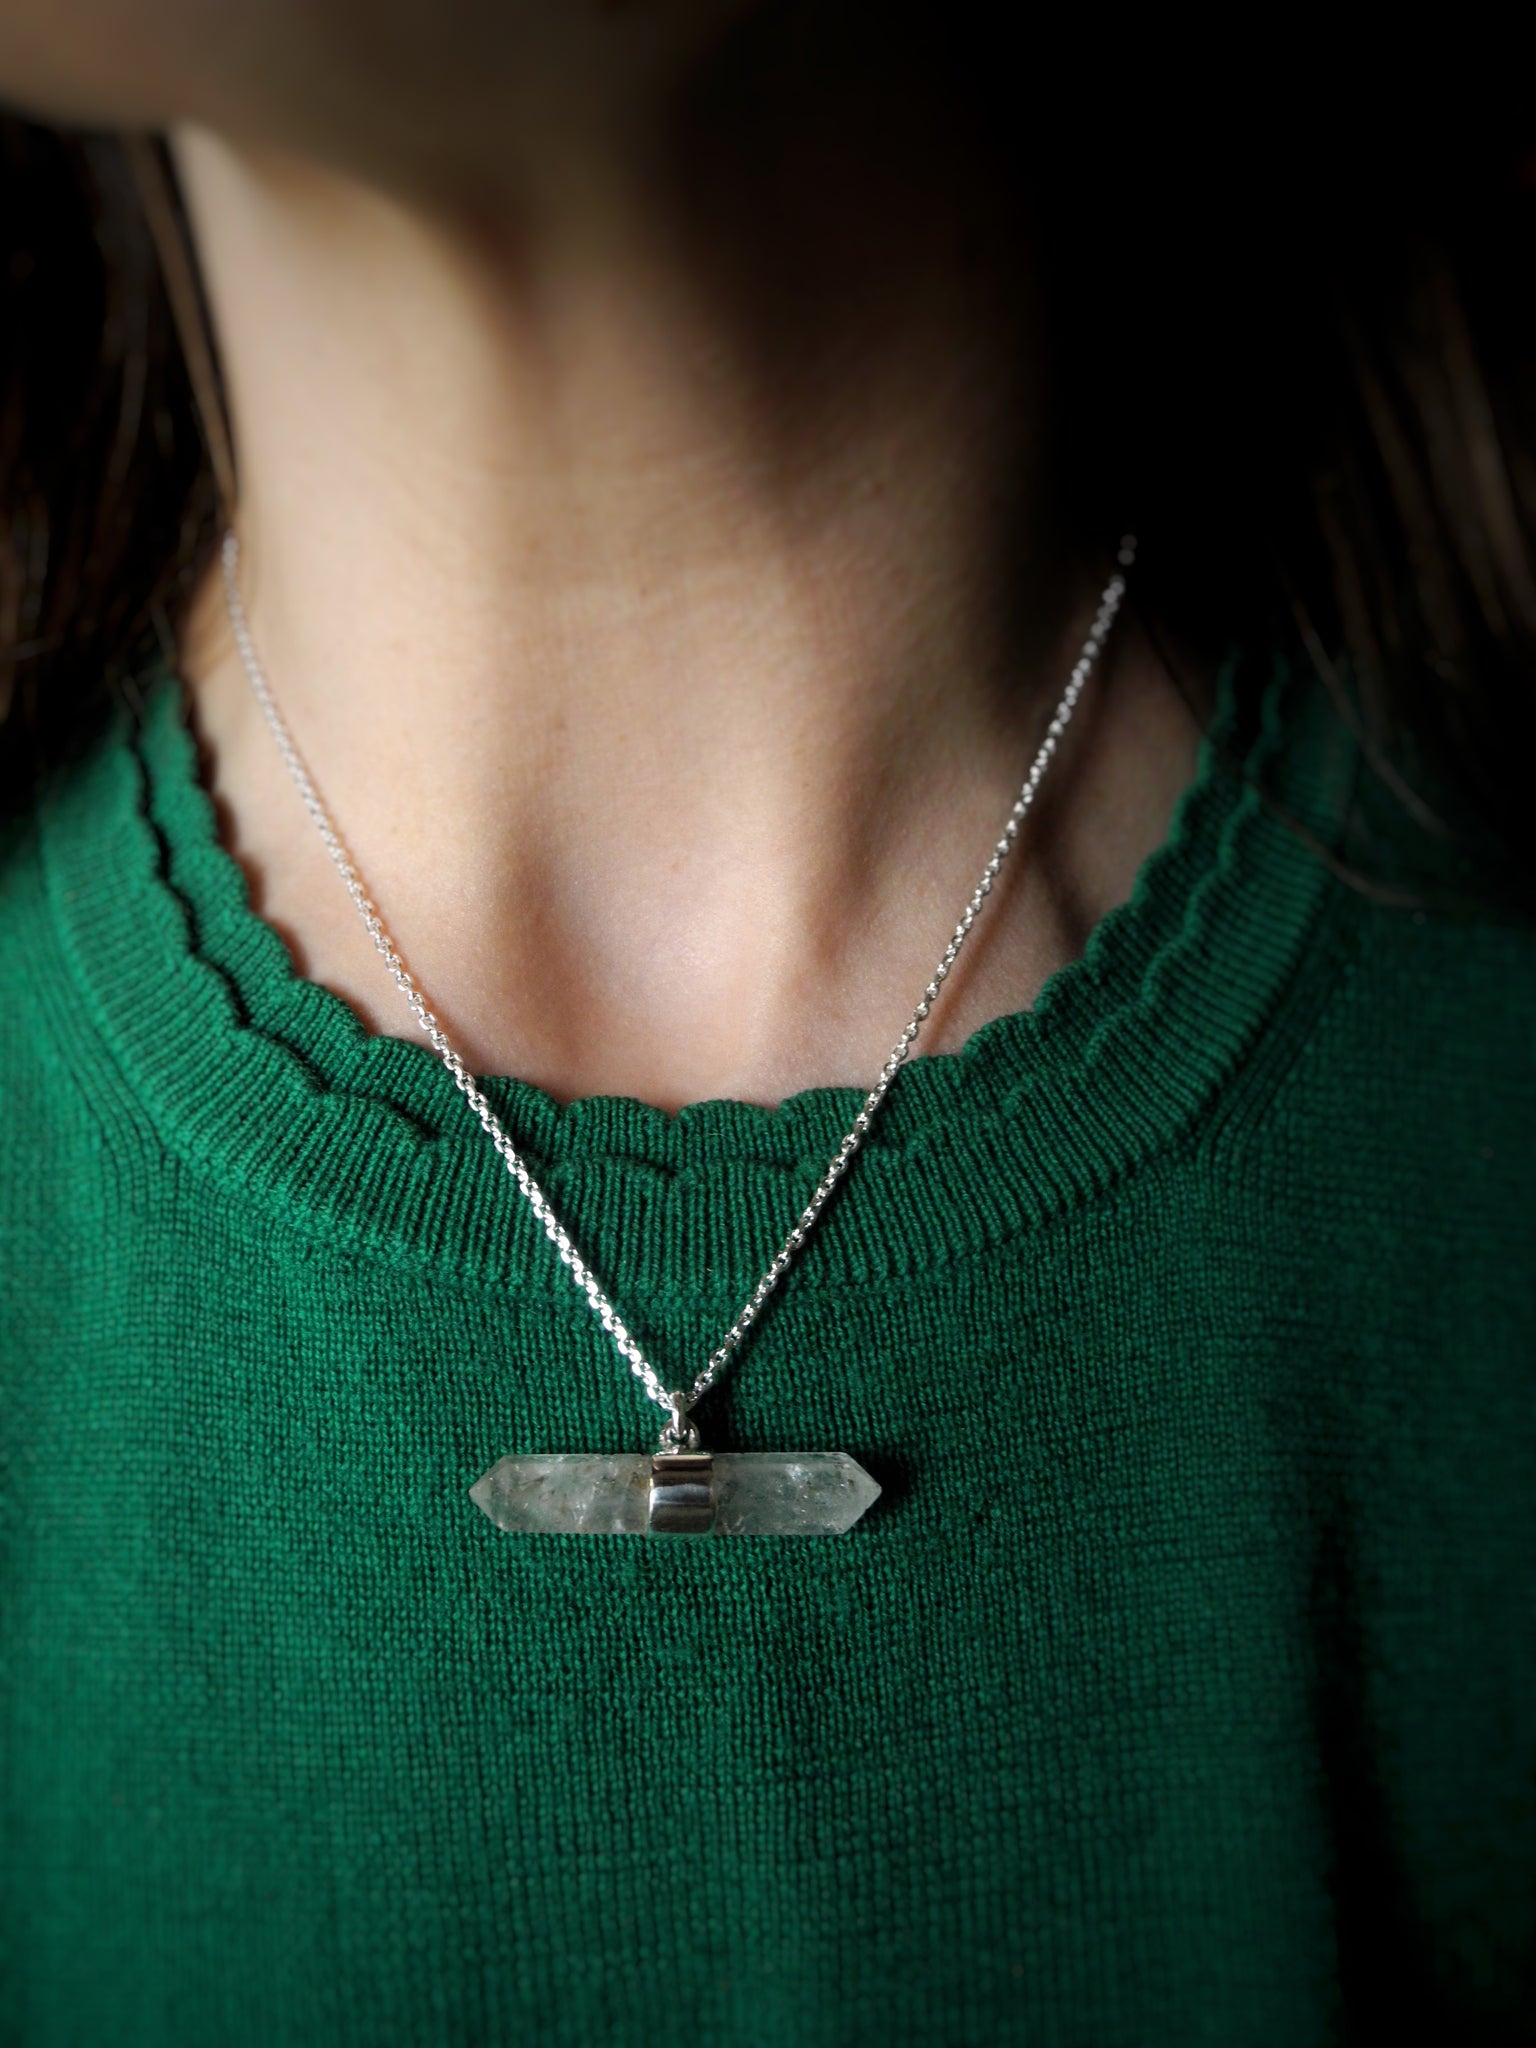 Horizontal Space Necklace